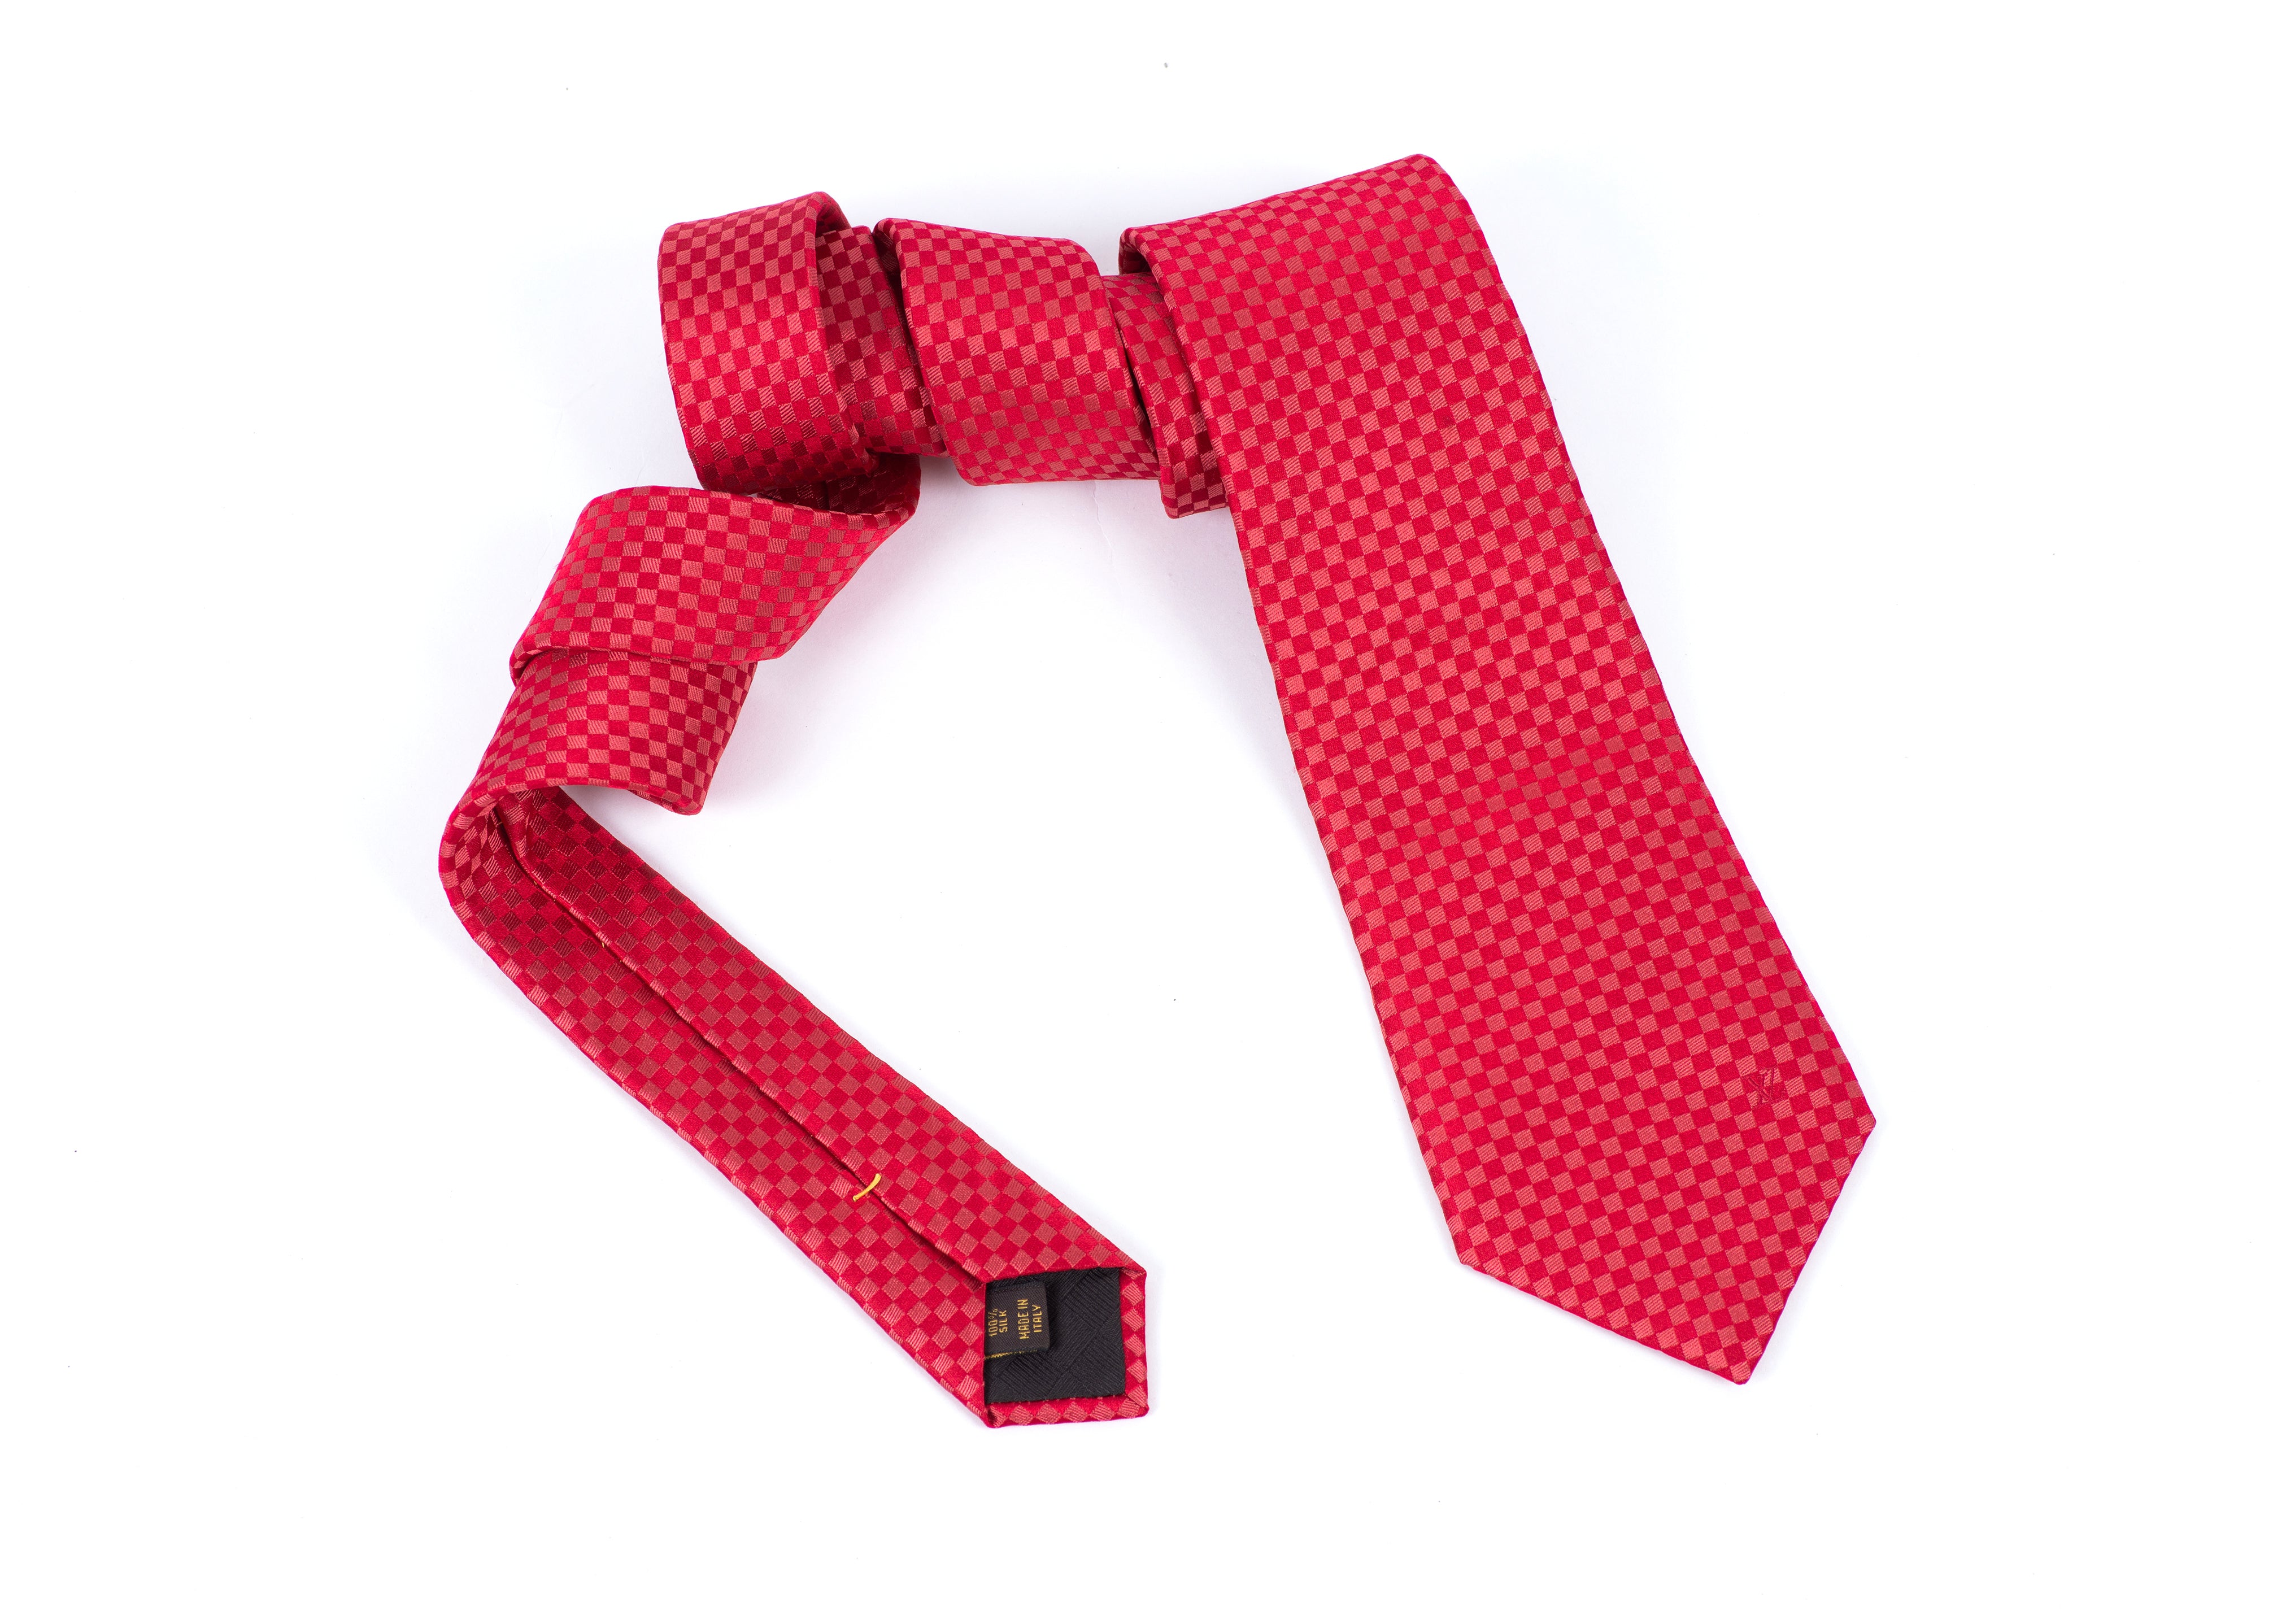 Louis Vuitton Silk Pattern Tie - Red Ties, Suiting Accessories - LOU803075